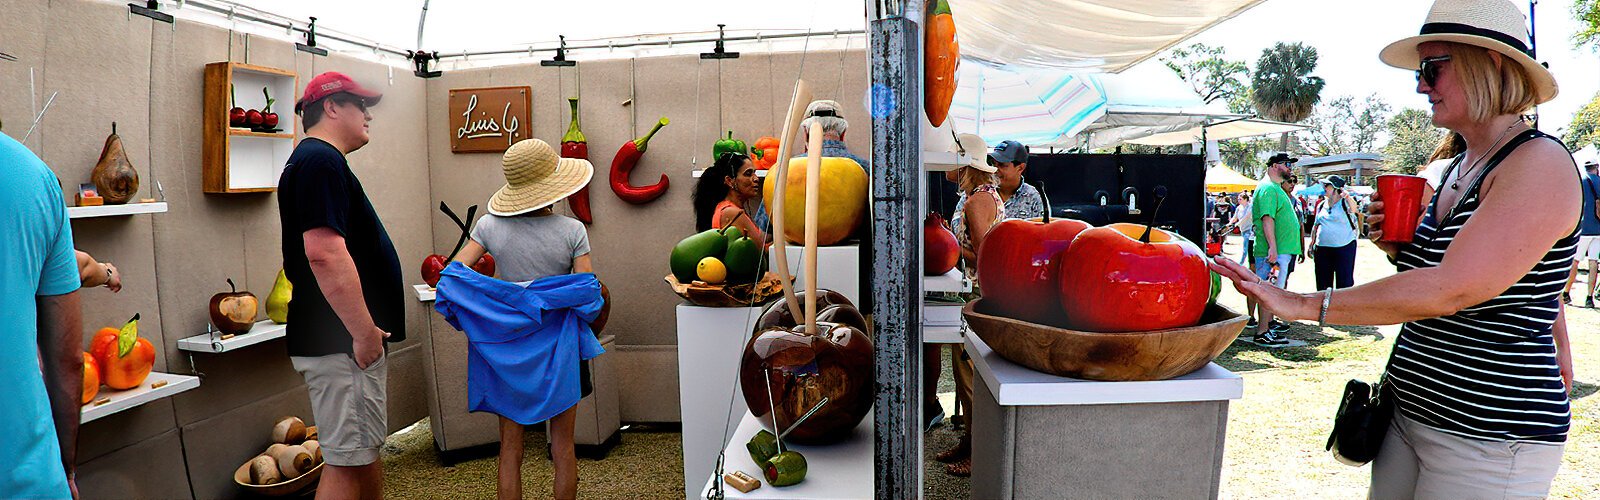 The decorative display of oversized glossy ceramic fruit by artist Luis Guttierez attract festival goers like bees to honey at the 53rd Annual Gasparilla Festival of the Arts at Julian B. Lane Riverfront Park.